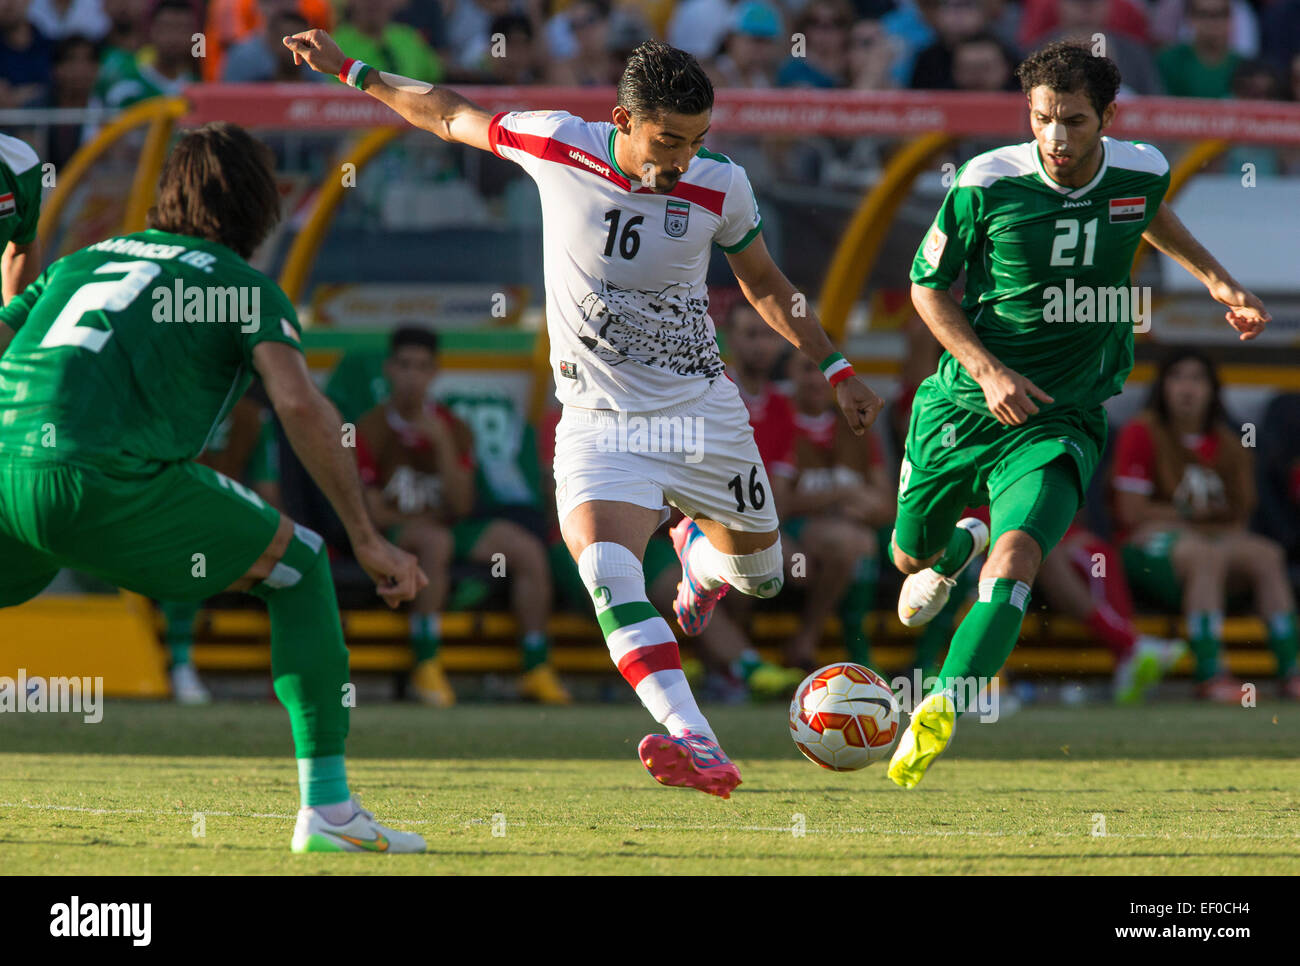 Canberra, Australia. 23rd Jan, 2015. Reza Ghoochannejhad (16) of Iran shoots the ball at the Iraqi goal in the FIFA Asian Football Confederation 2015 Asian Cup quarter-final game played in Canberra Stadium, Canberra, Australia © Action Plus Sports/Alamy Live News Stock Photo